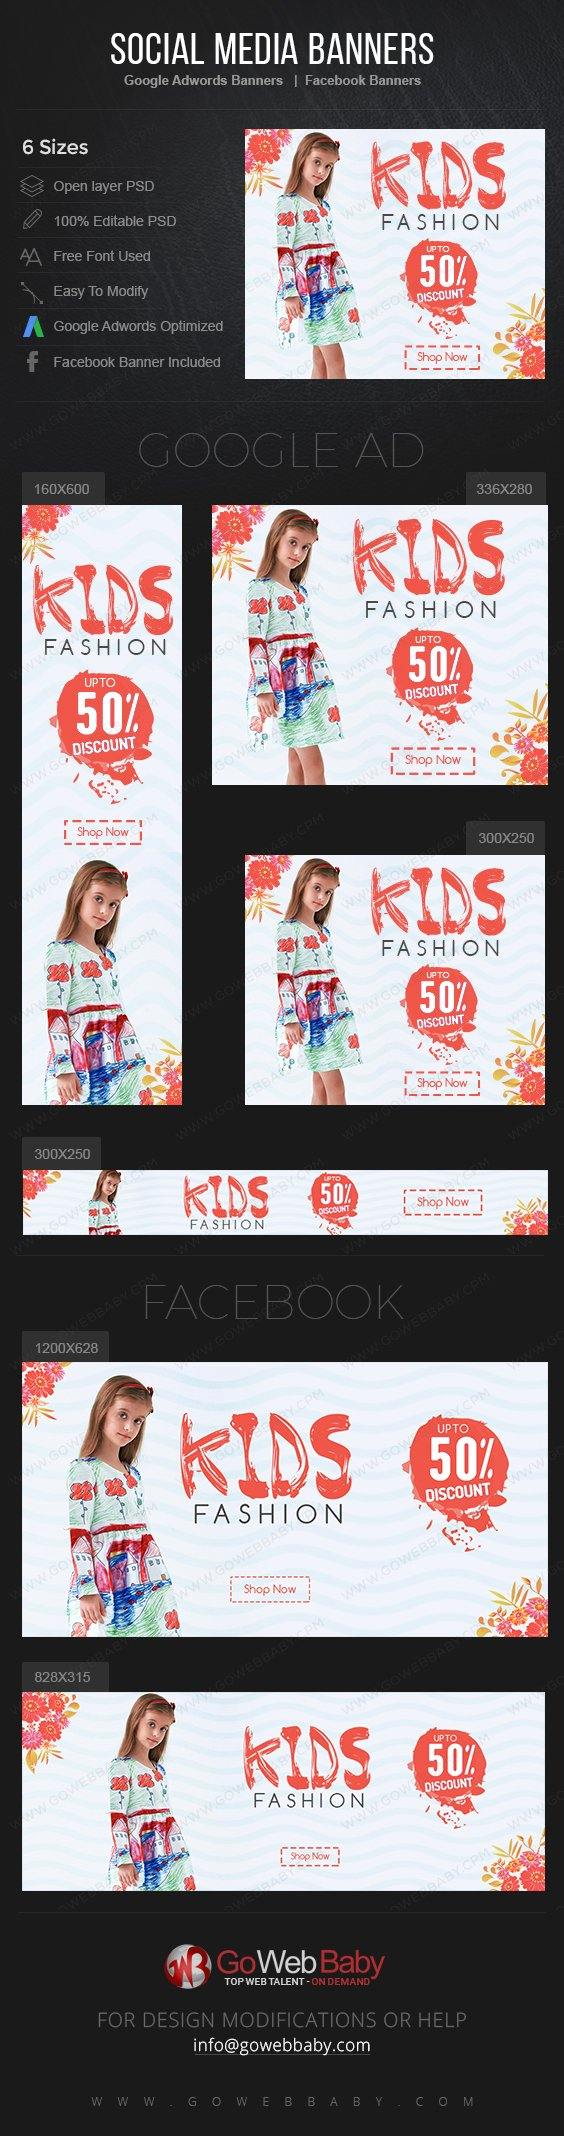 Google Adwords Display Banner with Facebook banners -Kids Fashion For Website Marketing - GoWebBaby.Com